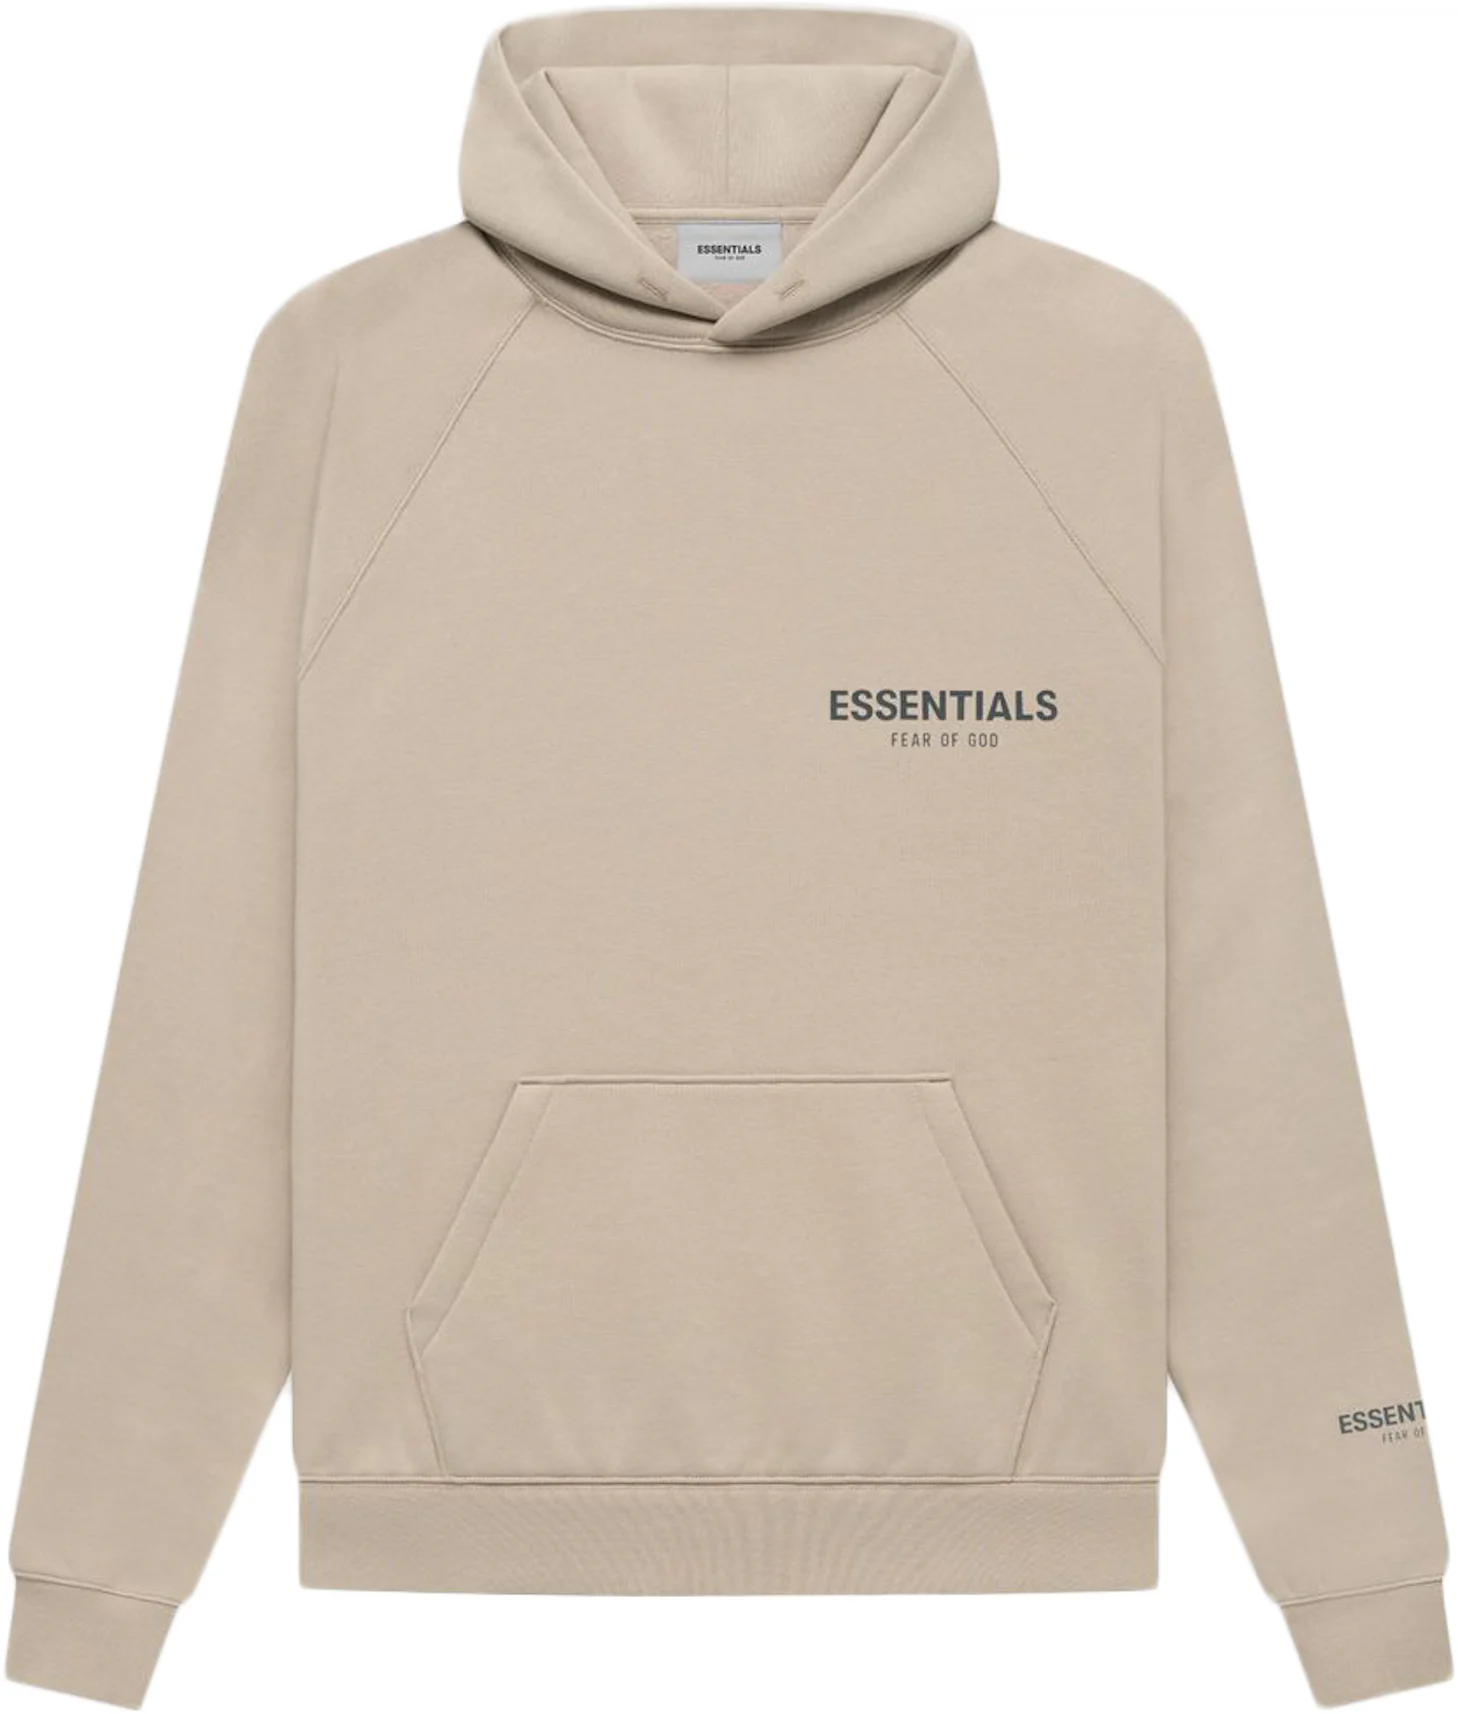 https://images.stockx.com/images/Fear-of-God-Essentials-Core-Collection-Pullover-Hoodie-String.jpg?fit=fill&bg=FFFFFF&w=1200&h=857&fm=webp&auto=compress&dpr=2&trim=color&updated_at=1639003324&q=60